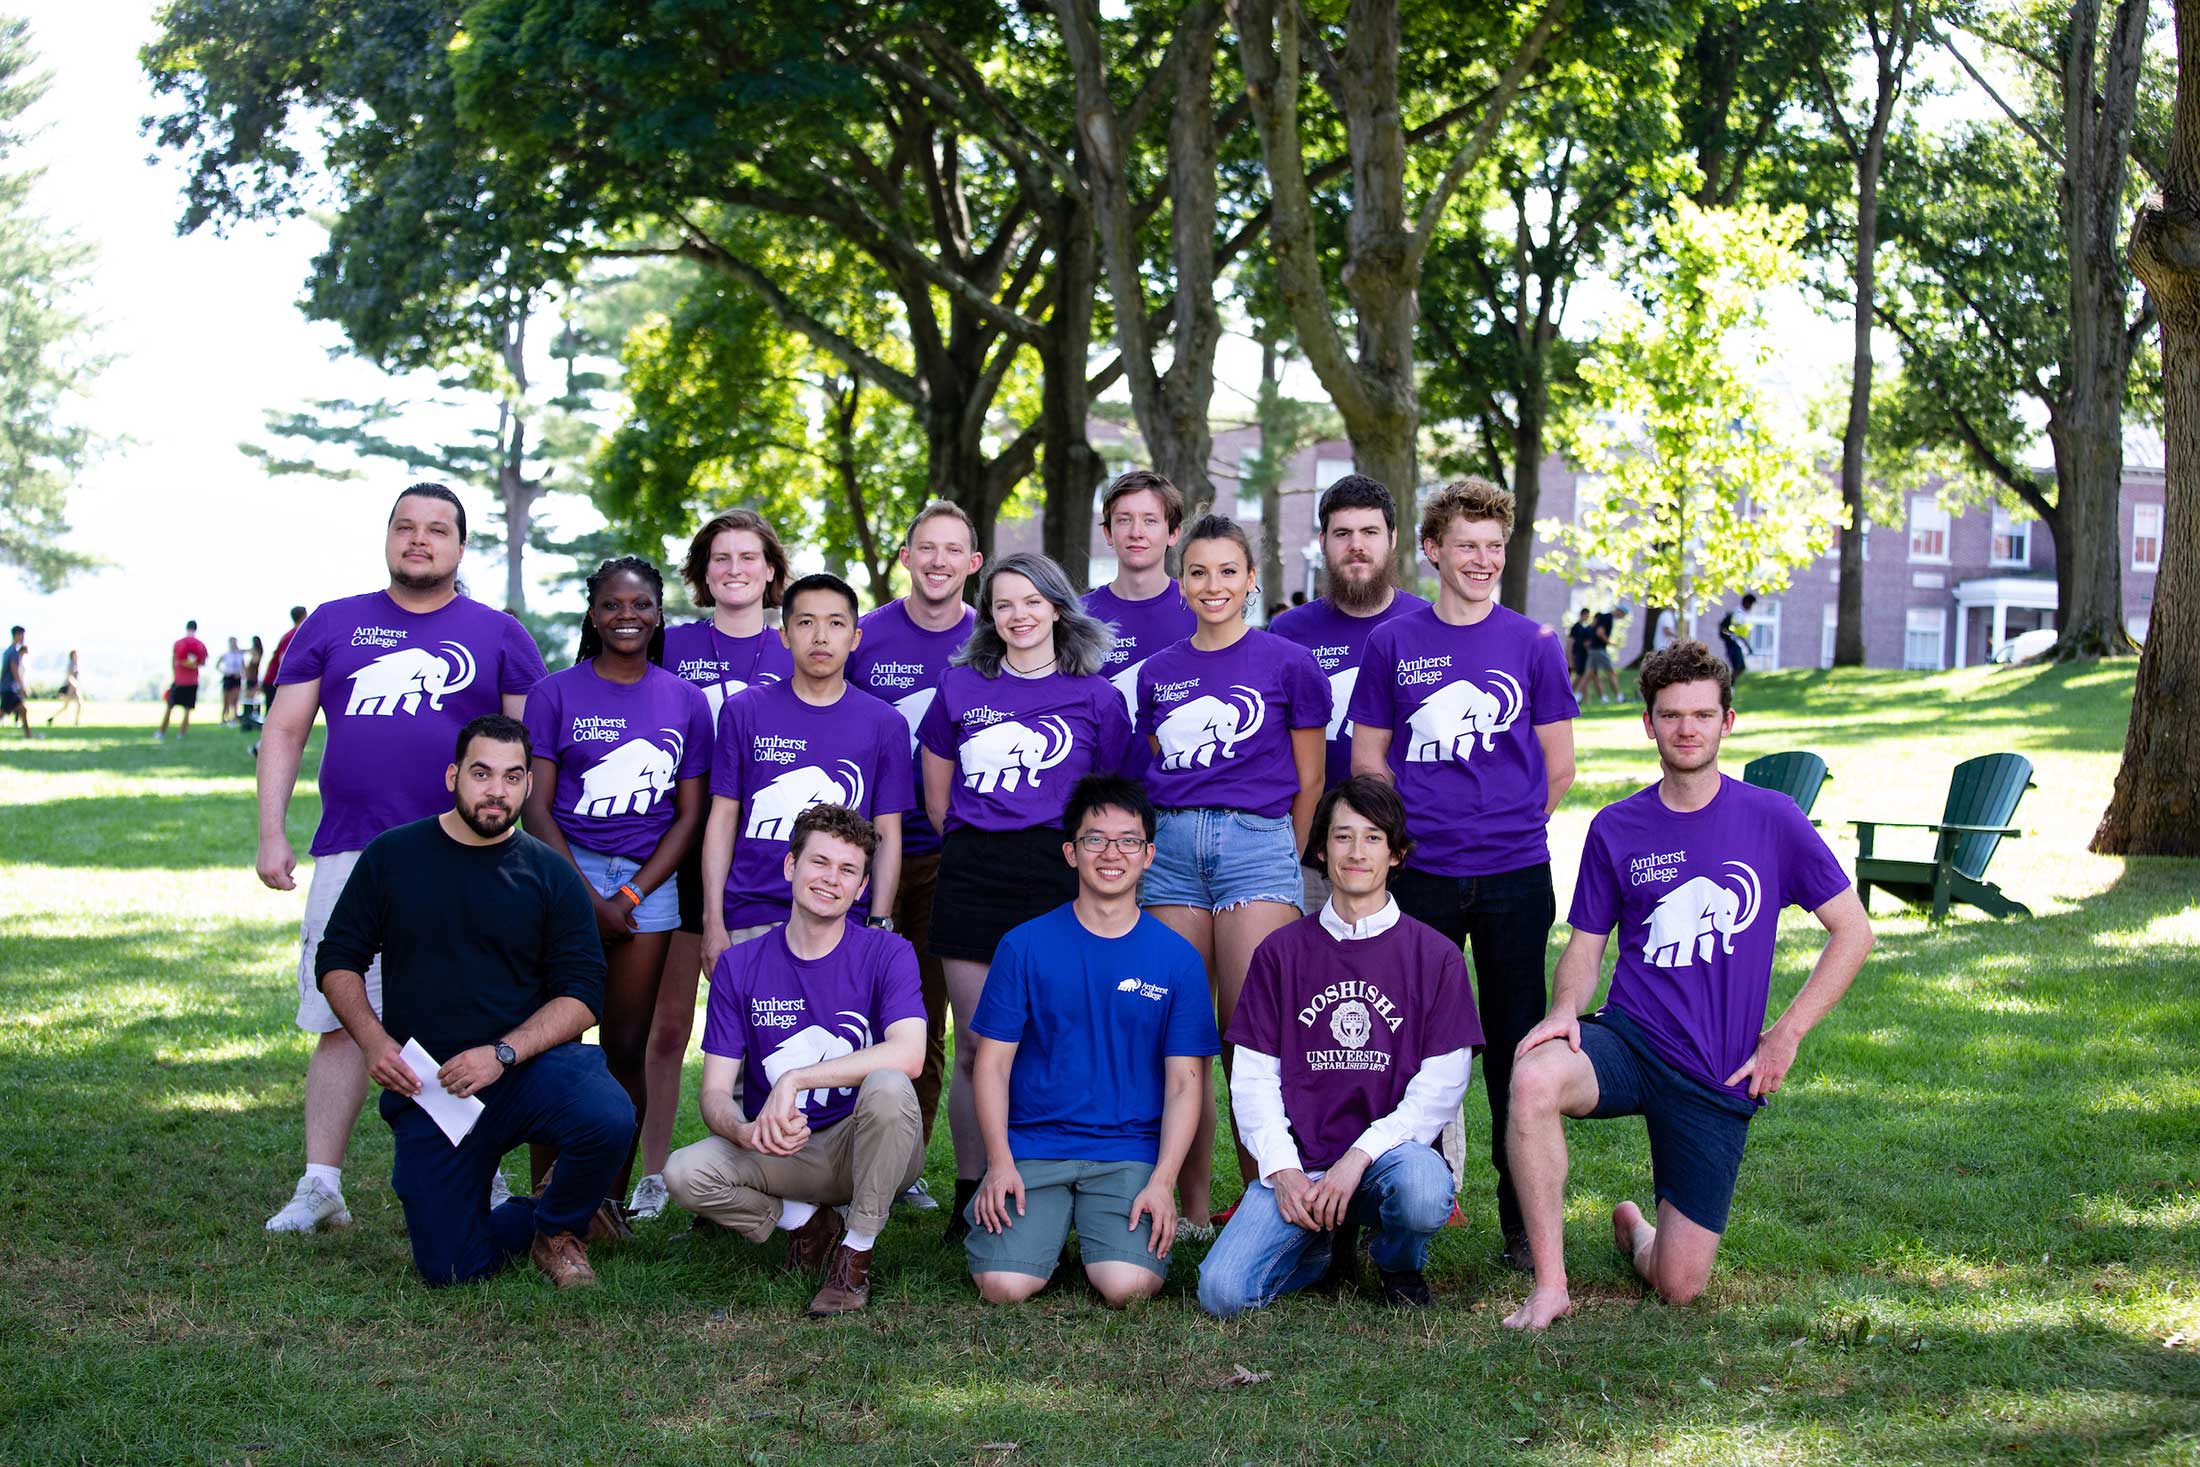 A group of transfer students -- most of them wearing purple mammoth tshirts -- pose together on the academic quad.